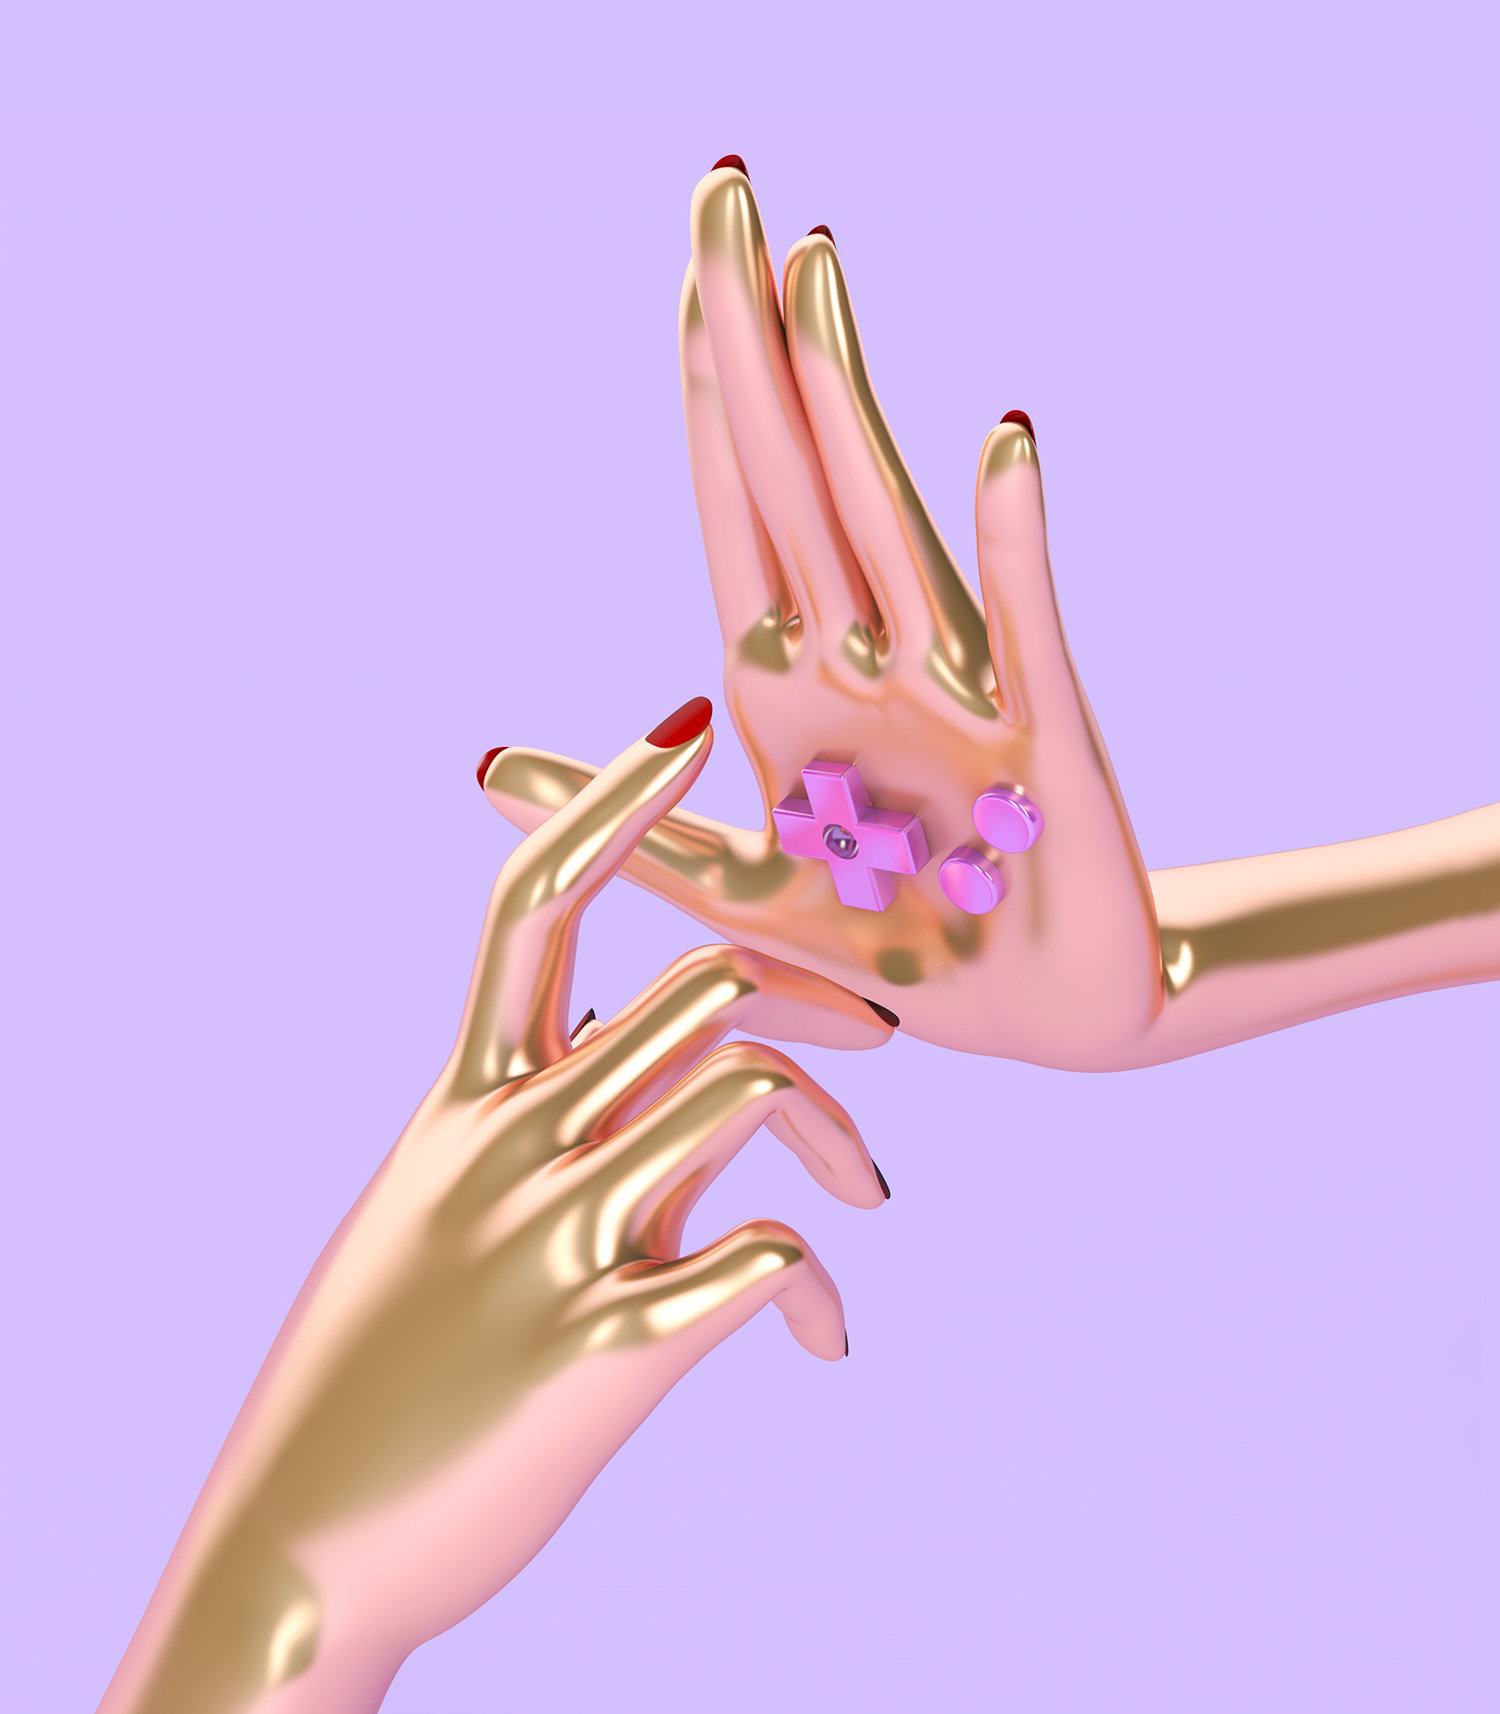 gold hand and fingers, gameboy